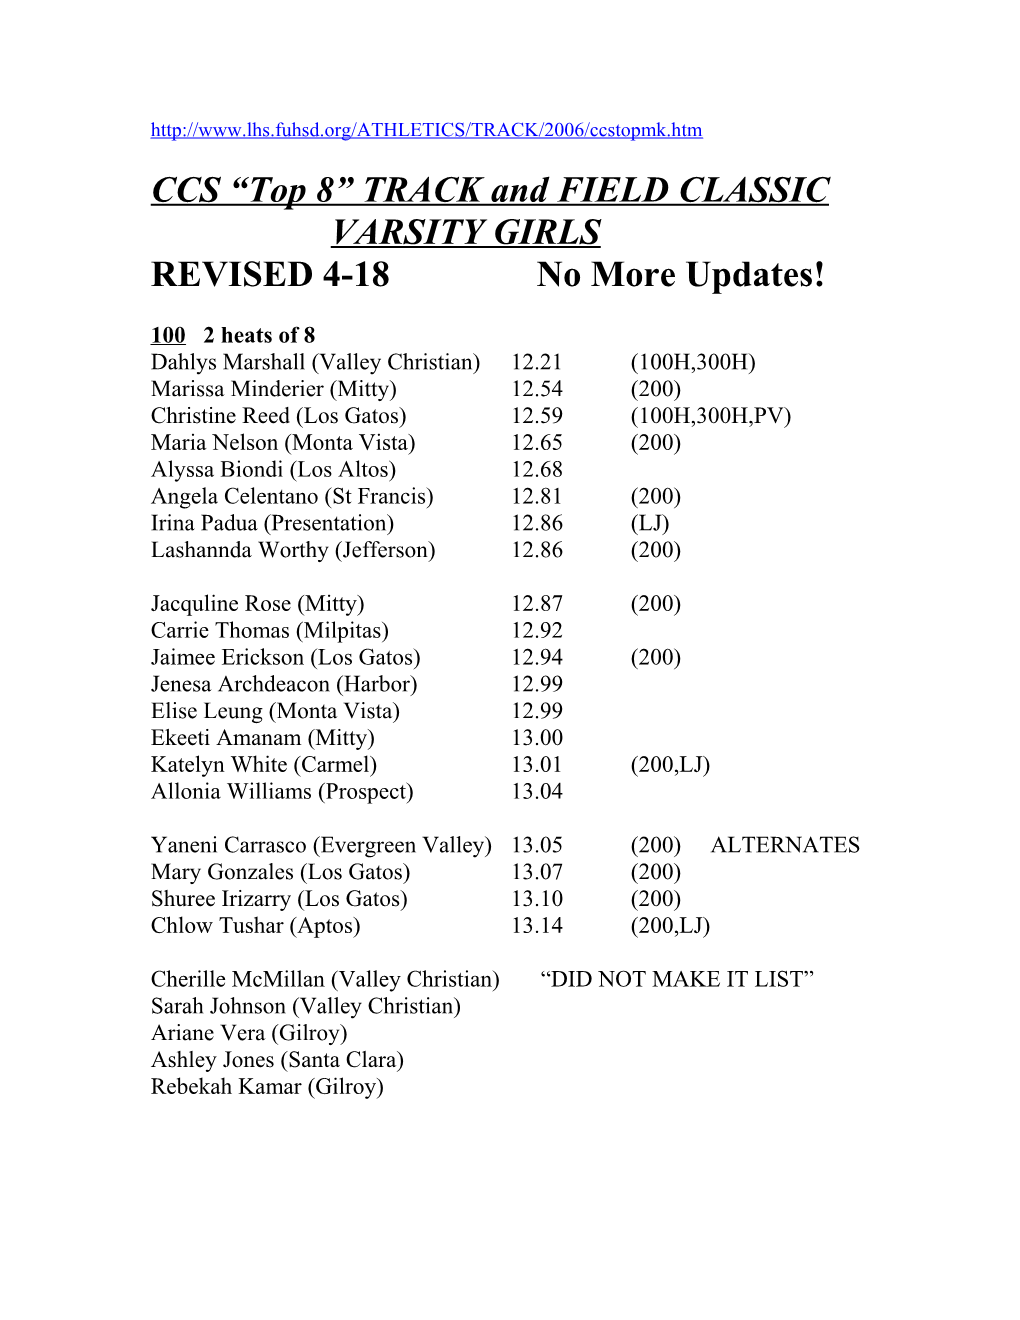 CCS Top 8 TRACK and FIELD CLASSIC